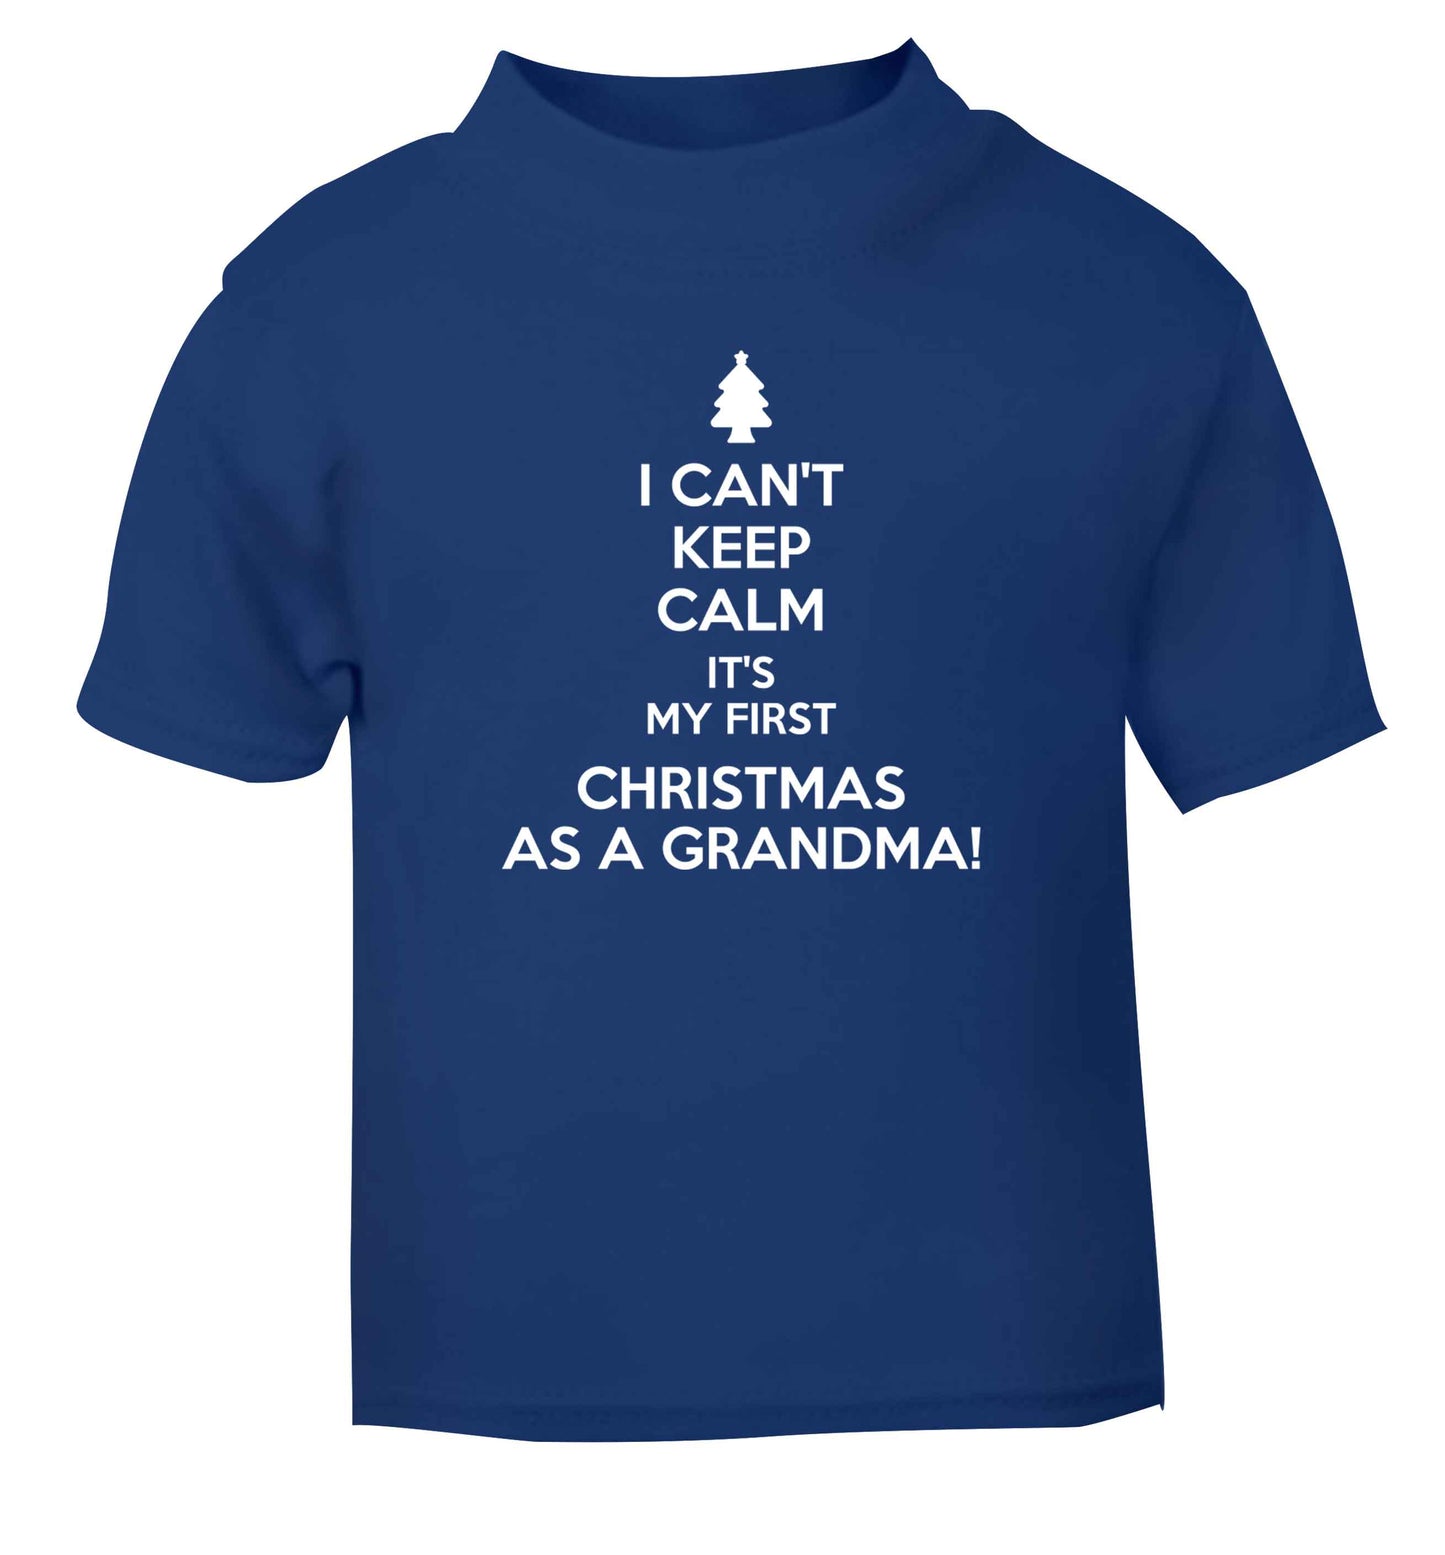 I can't keep calm it's my first Christmas as a grandma! blue Baby Toddler Tshirt 2 Years